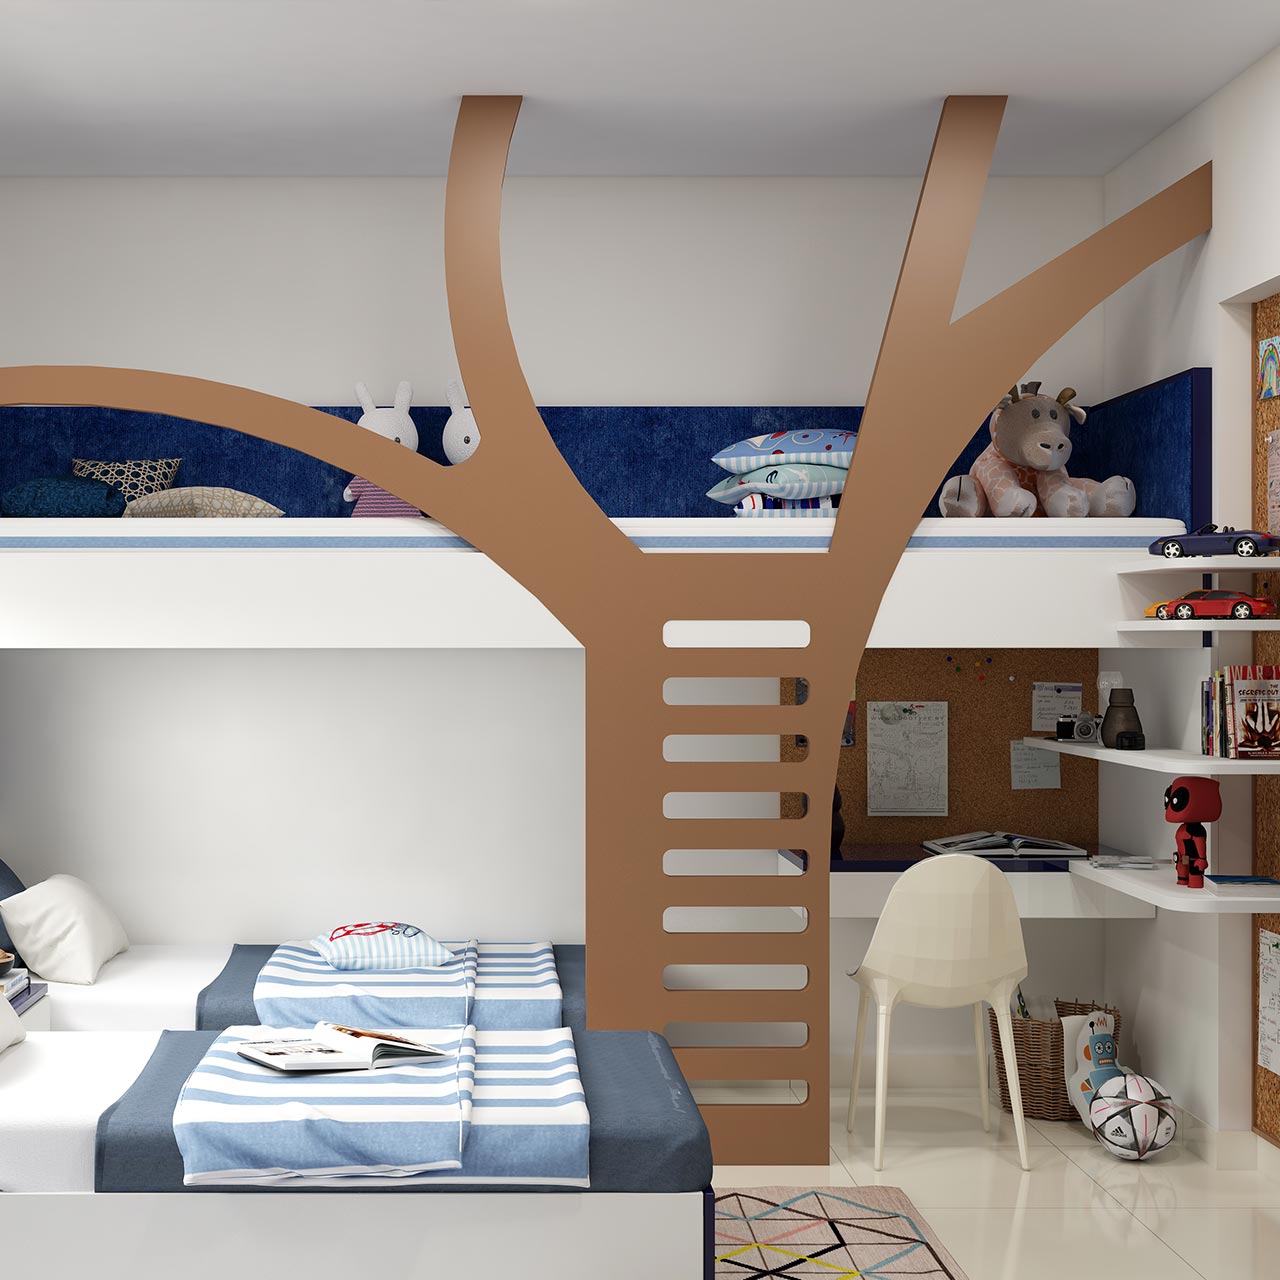 Design kids bedroom where they study, play, perform activities and even catch up with their little friends and here are some children bedroom ideas